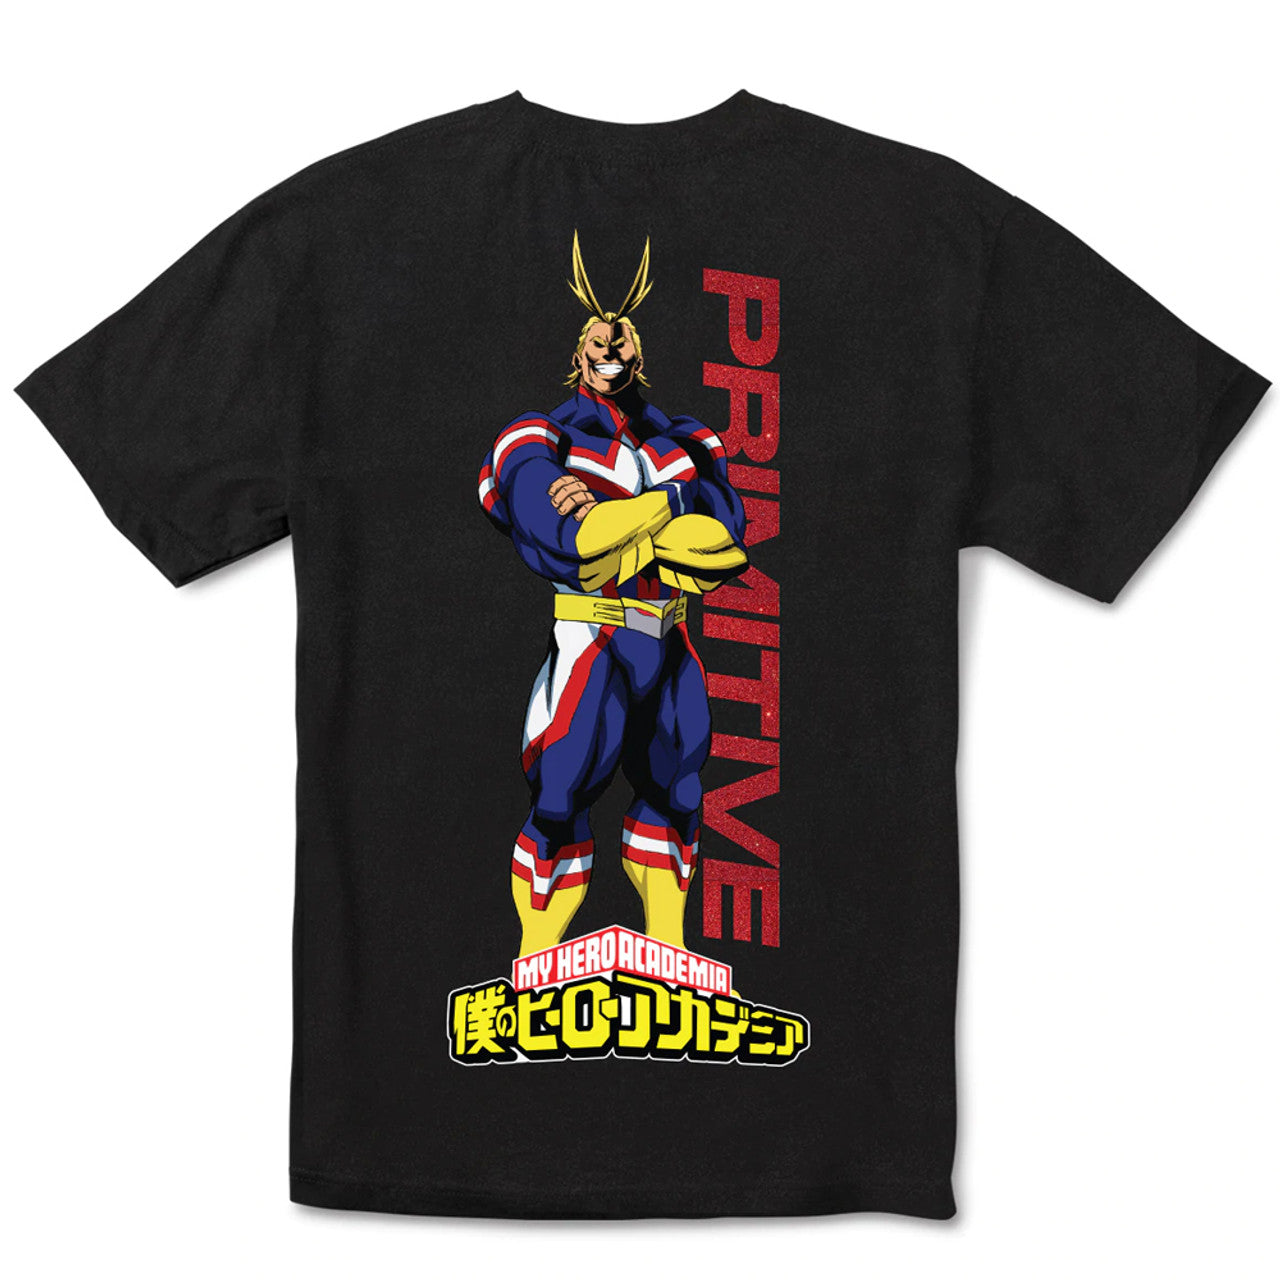 Primitive x My Hero Academia All Might Washed Tee Black